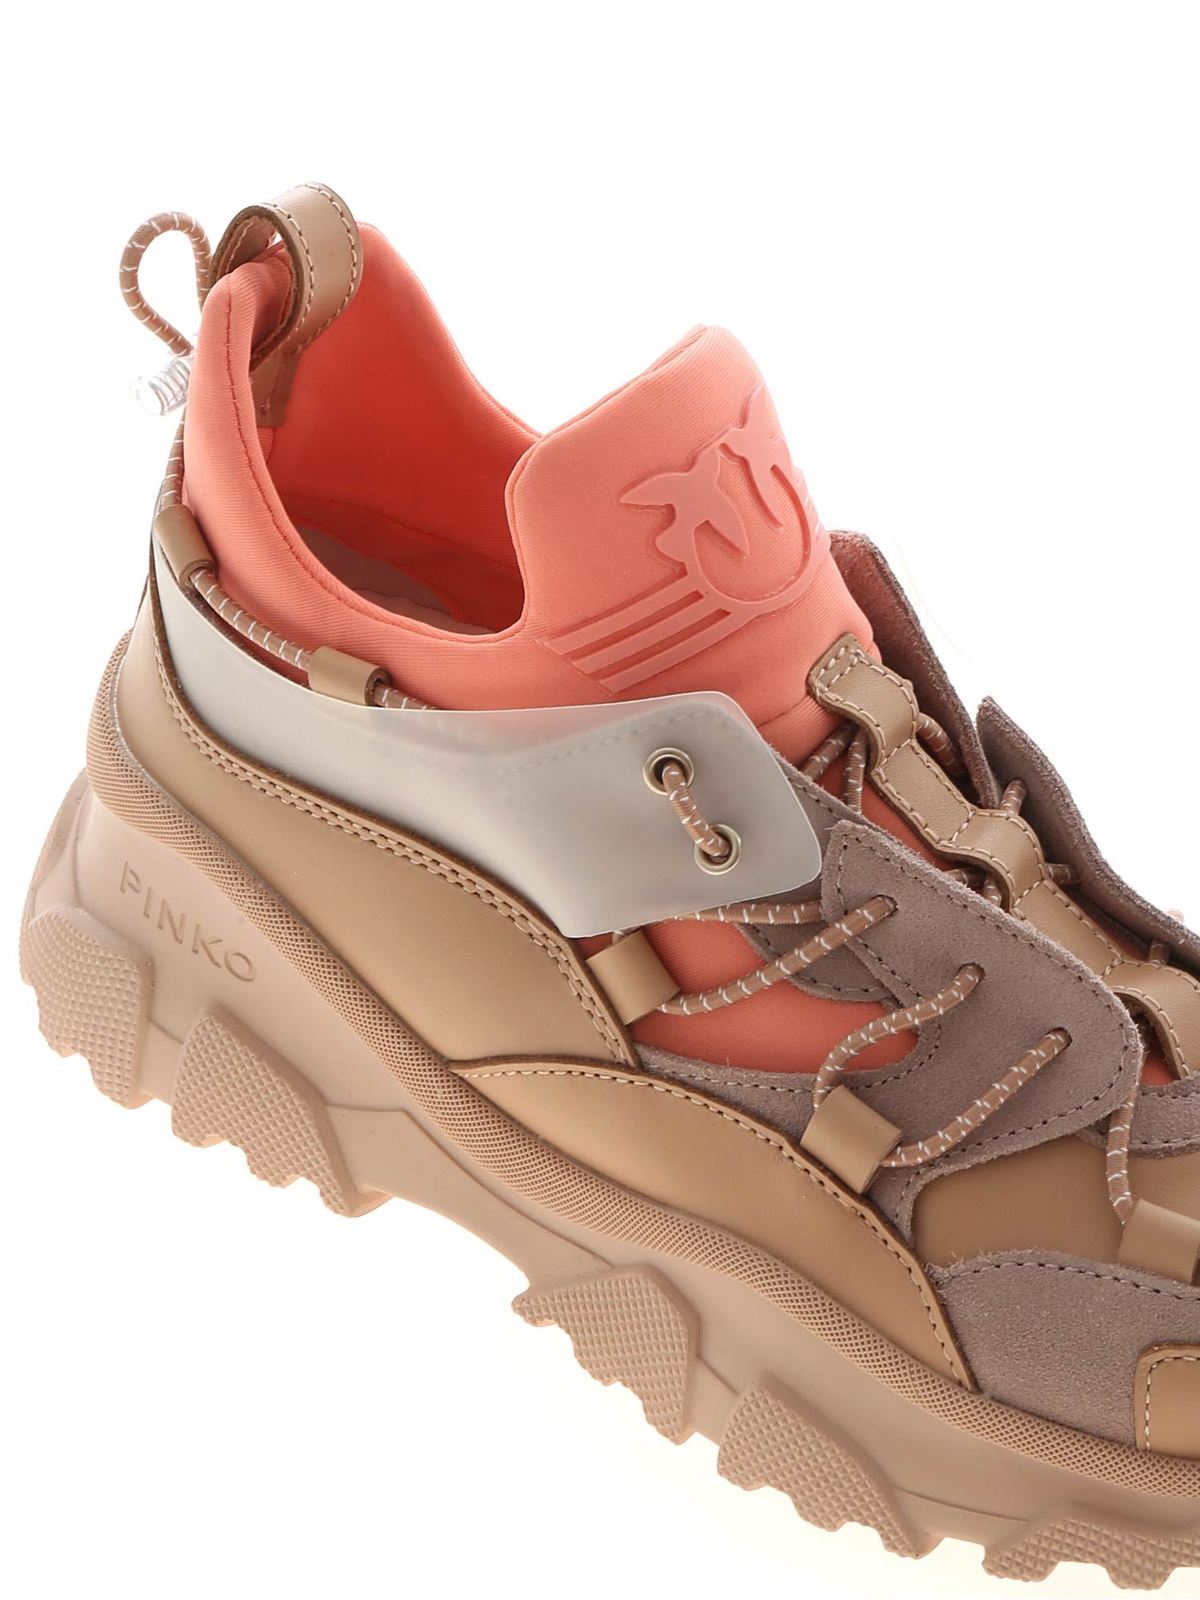 Trainers Pinko - Cumino - pink in of sneakers shades 1H20QLY628NQ0